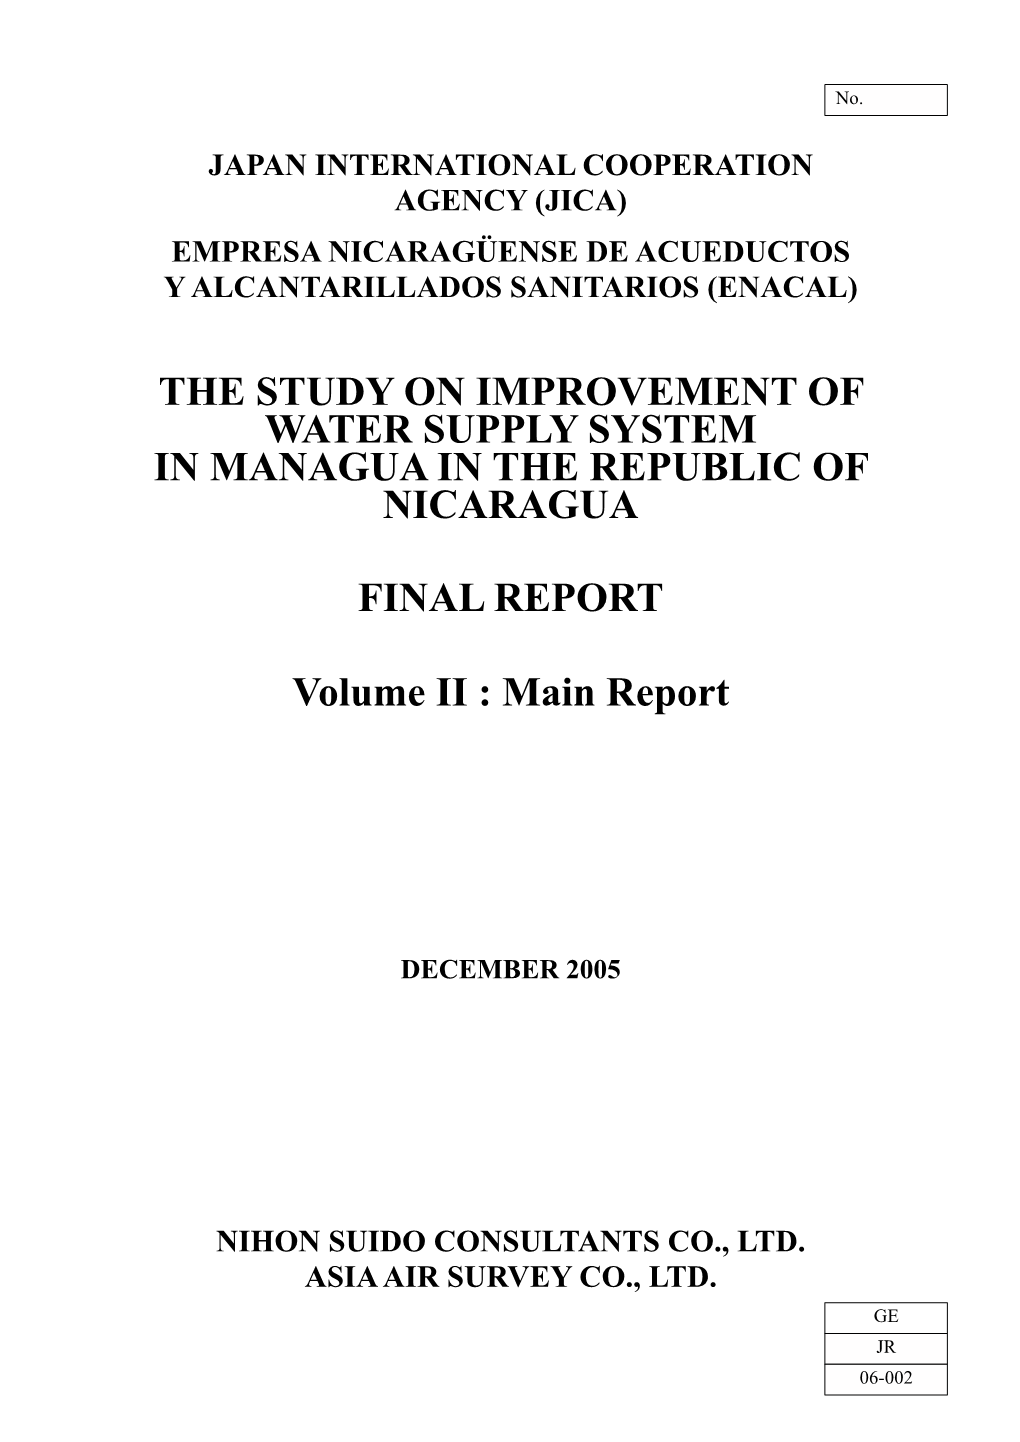 The Study on Improvement of Water Supply System in Managua in the Republic of Nicaragua